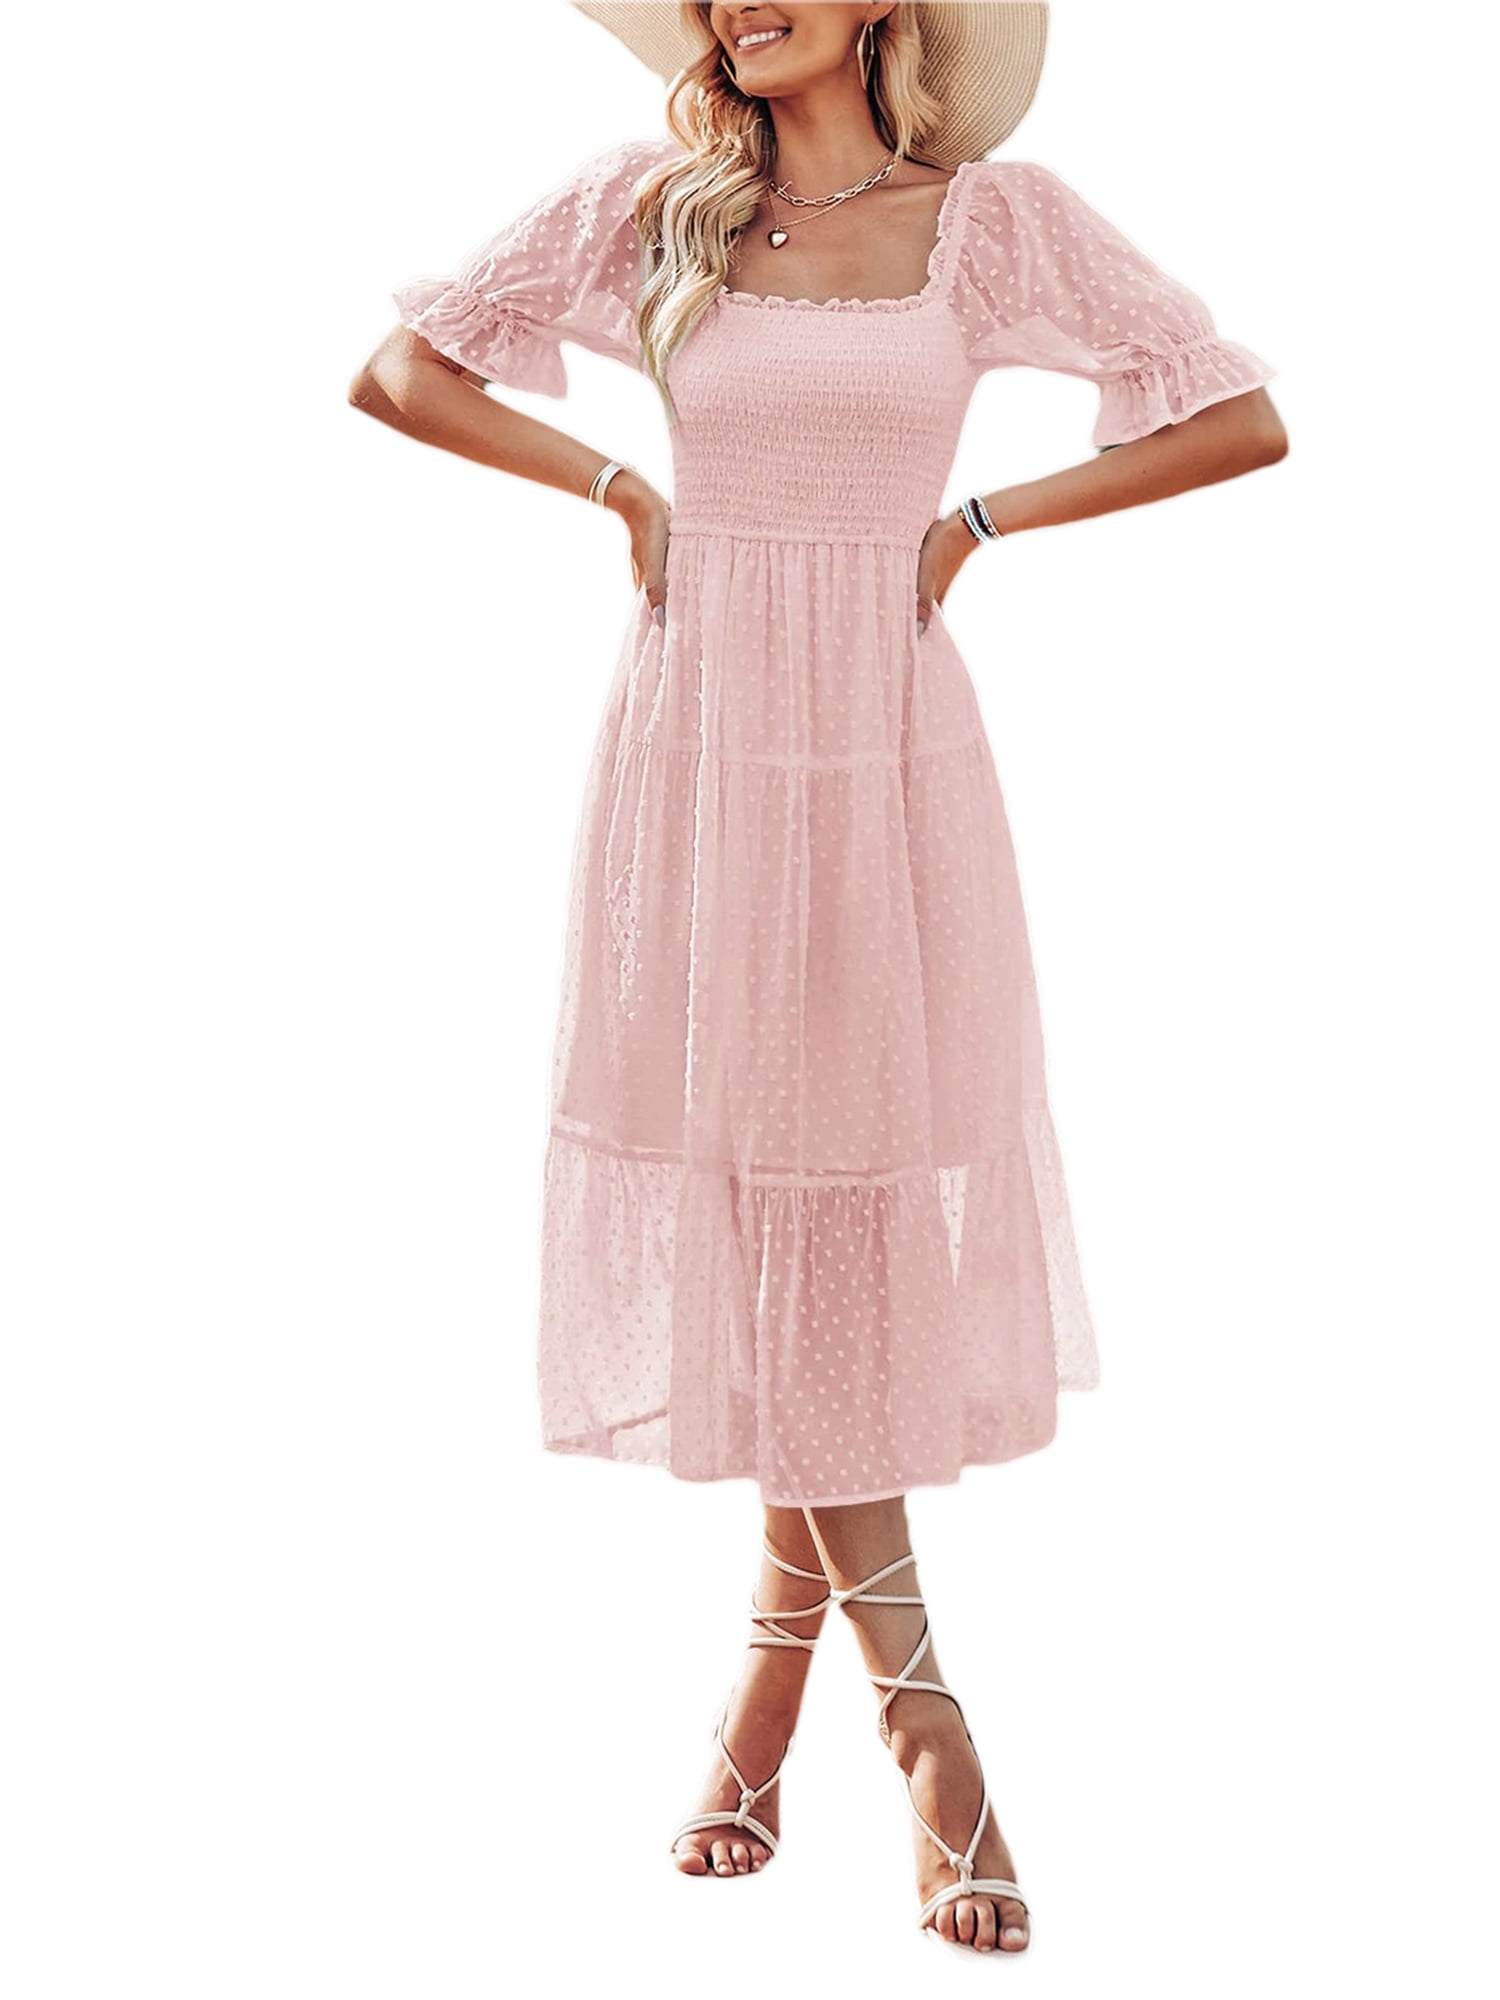 COTRIO Long Sleeve Dress for Women Square Neck Smocked Maxi Dress